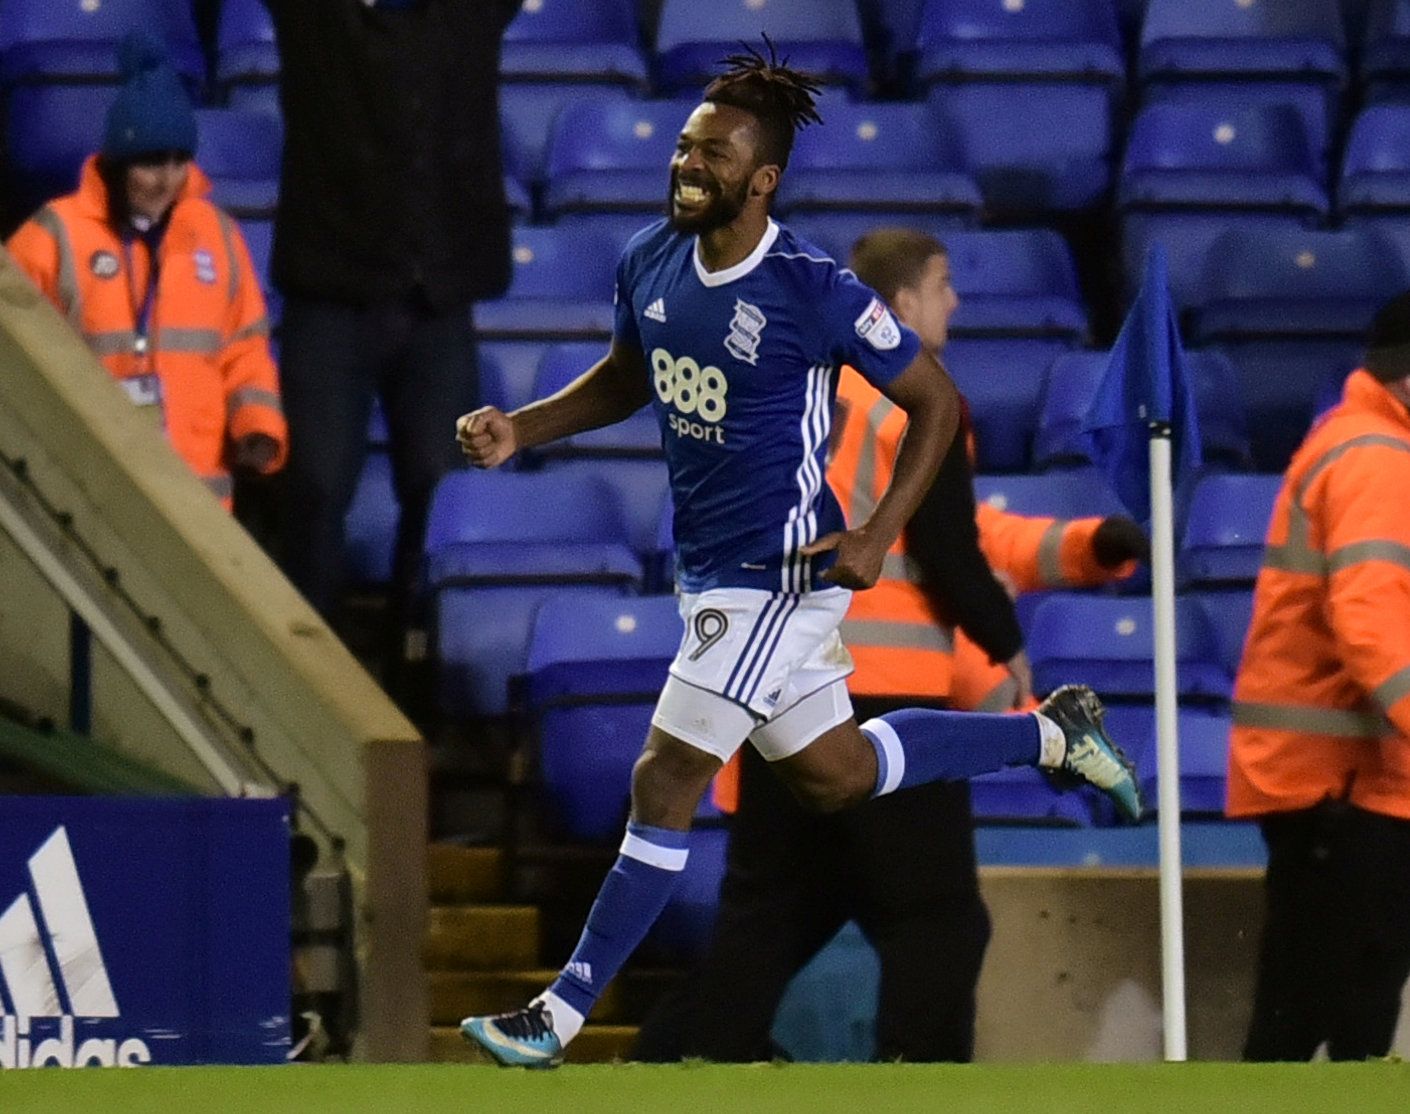 Soccer Football - Championship - Birmingham City vs Leeds United - St Andrew’s, Birmingham, Britain - December 30, 2017   Birmingham City's Jacques Maghoma celebrates scoring their first goal   Action Images/Paul Burrows    EDITORIAL USE ONLY. No use with unauthorized audio, video, data, fixture lists, club/league logos or 